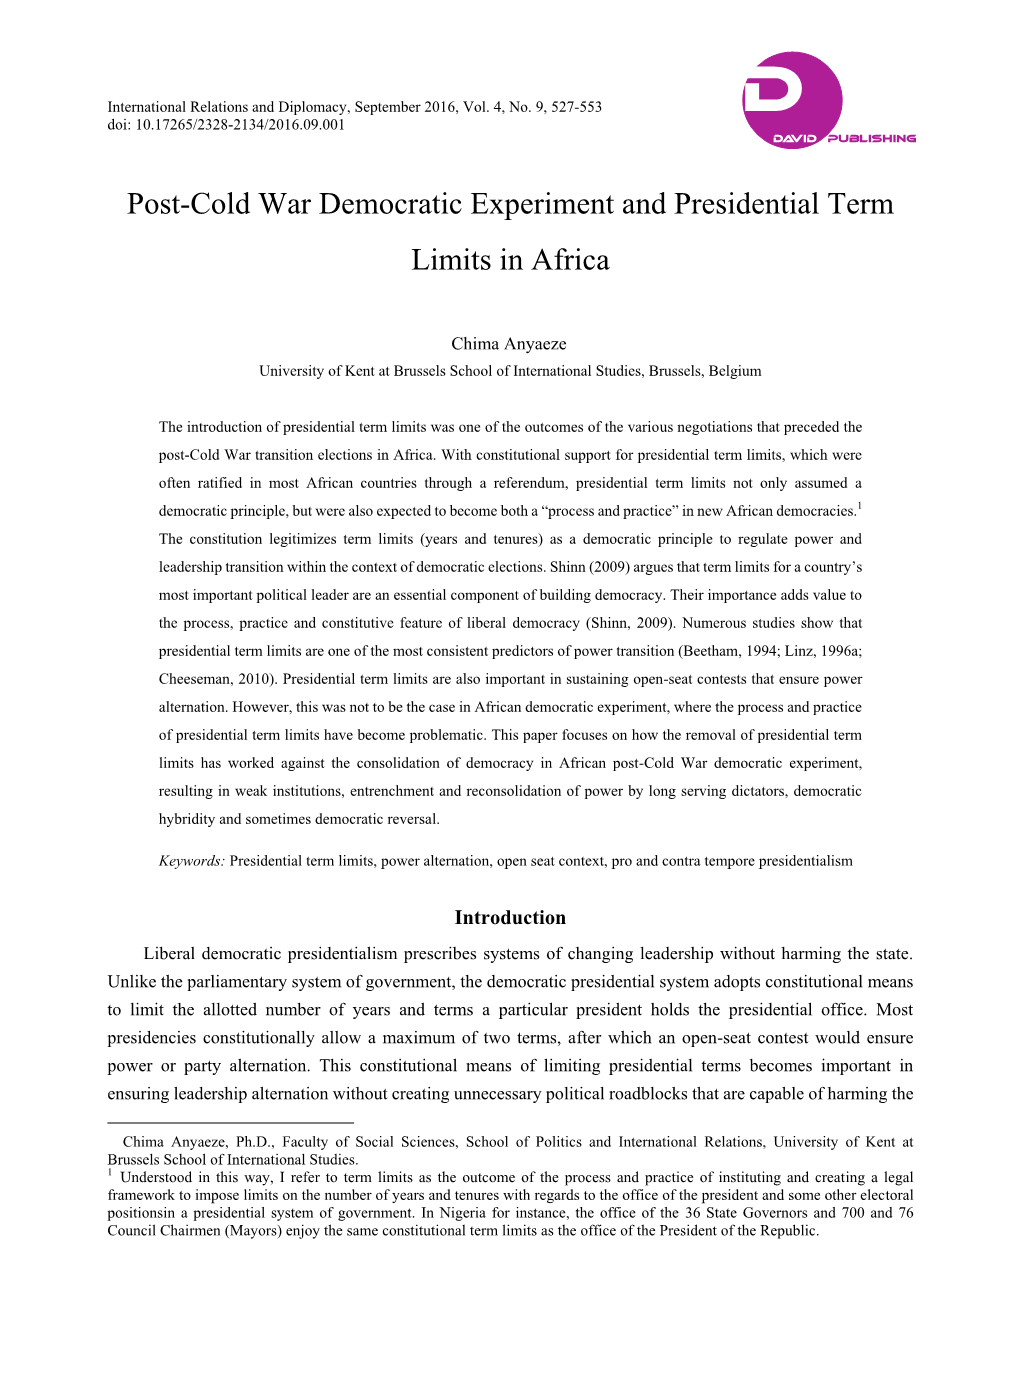 Post-Cold War Democratic Experiment and Presidential Term Limits in Africa